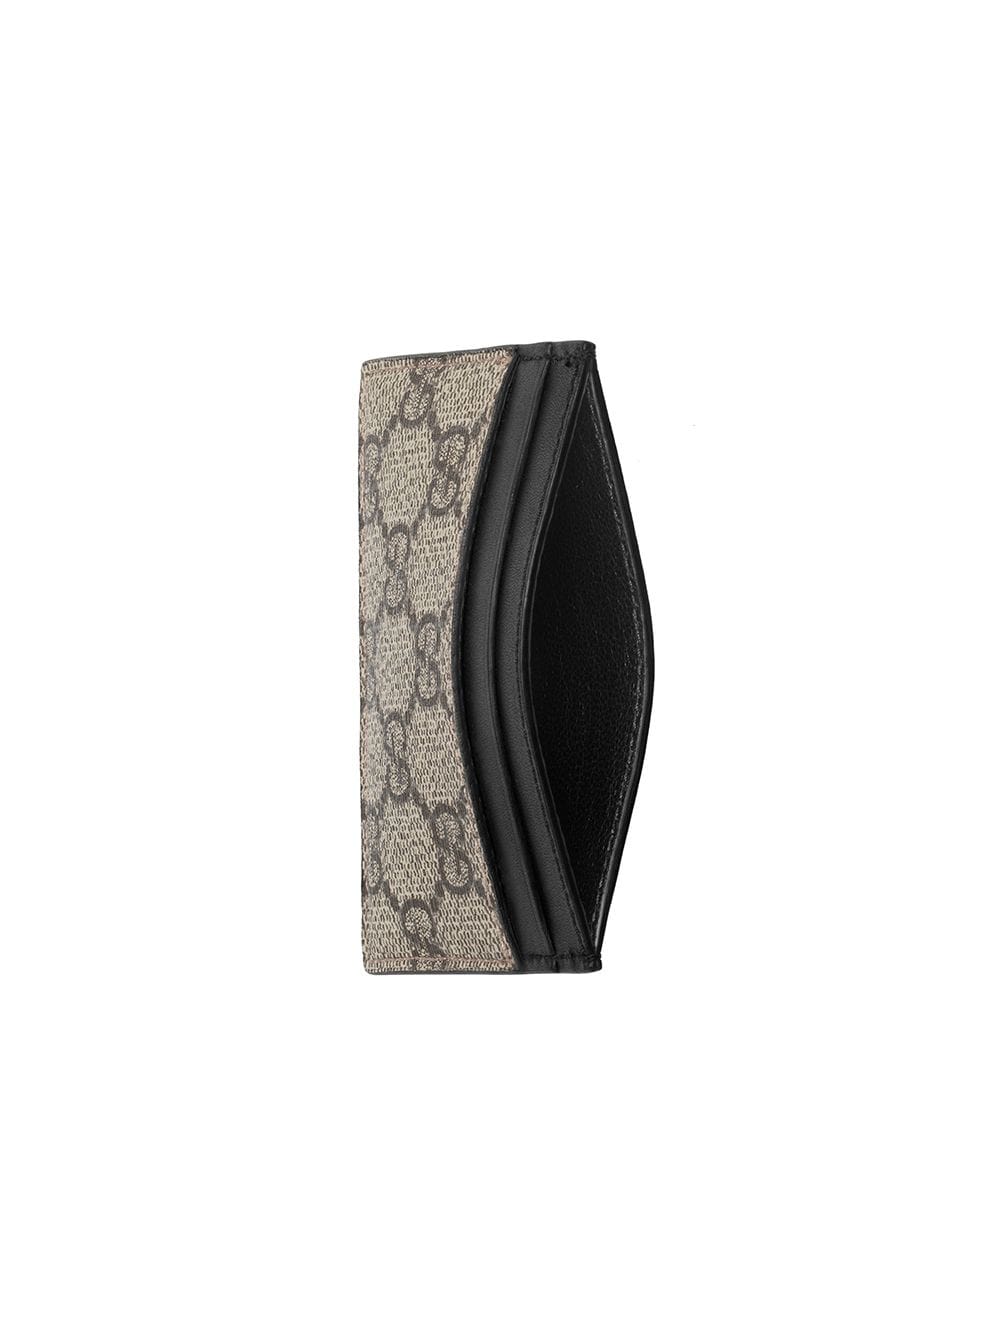 Gucci Card Case GG Supreme Kingsnake Print Black/Grey in Canvas/Leather  with Black Palladium-tone - US